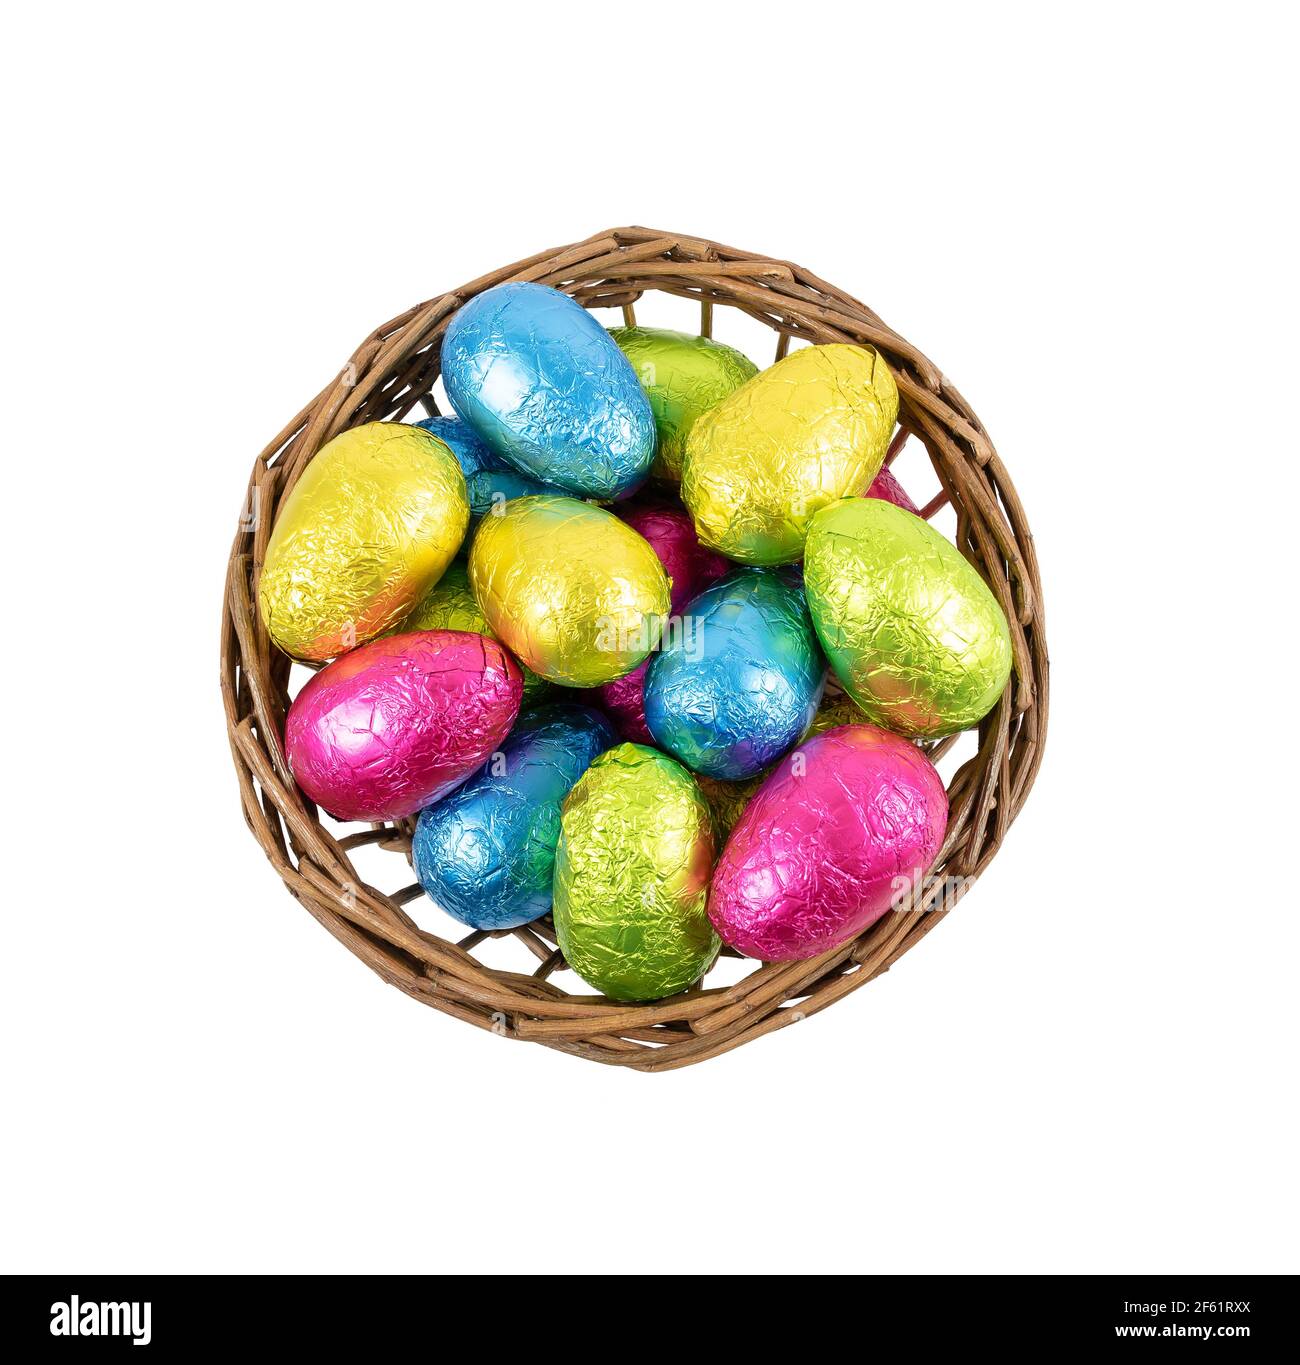 Easter eggs in basket . Chocolate eggs wrapped in colorful foil. Stock Photo